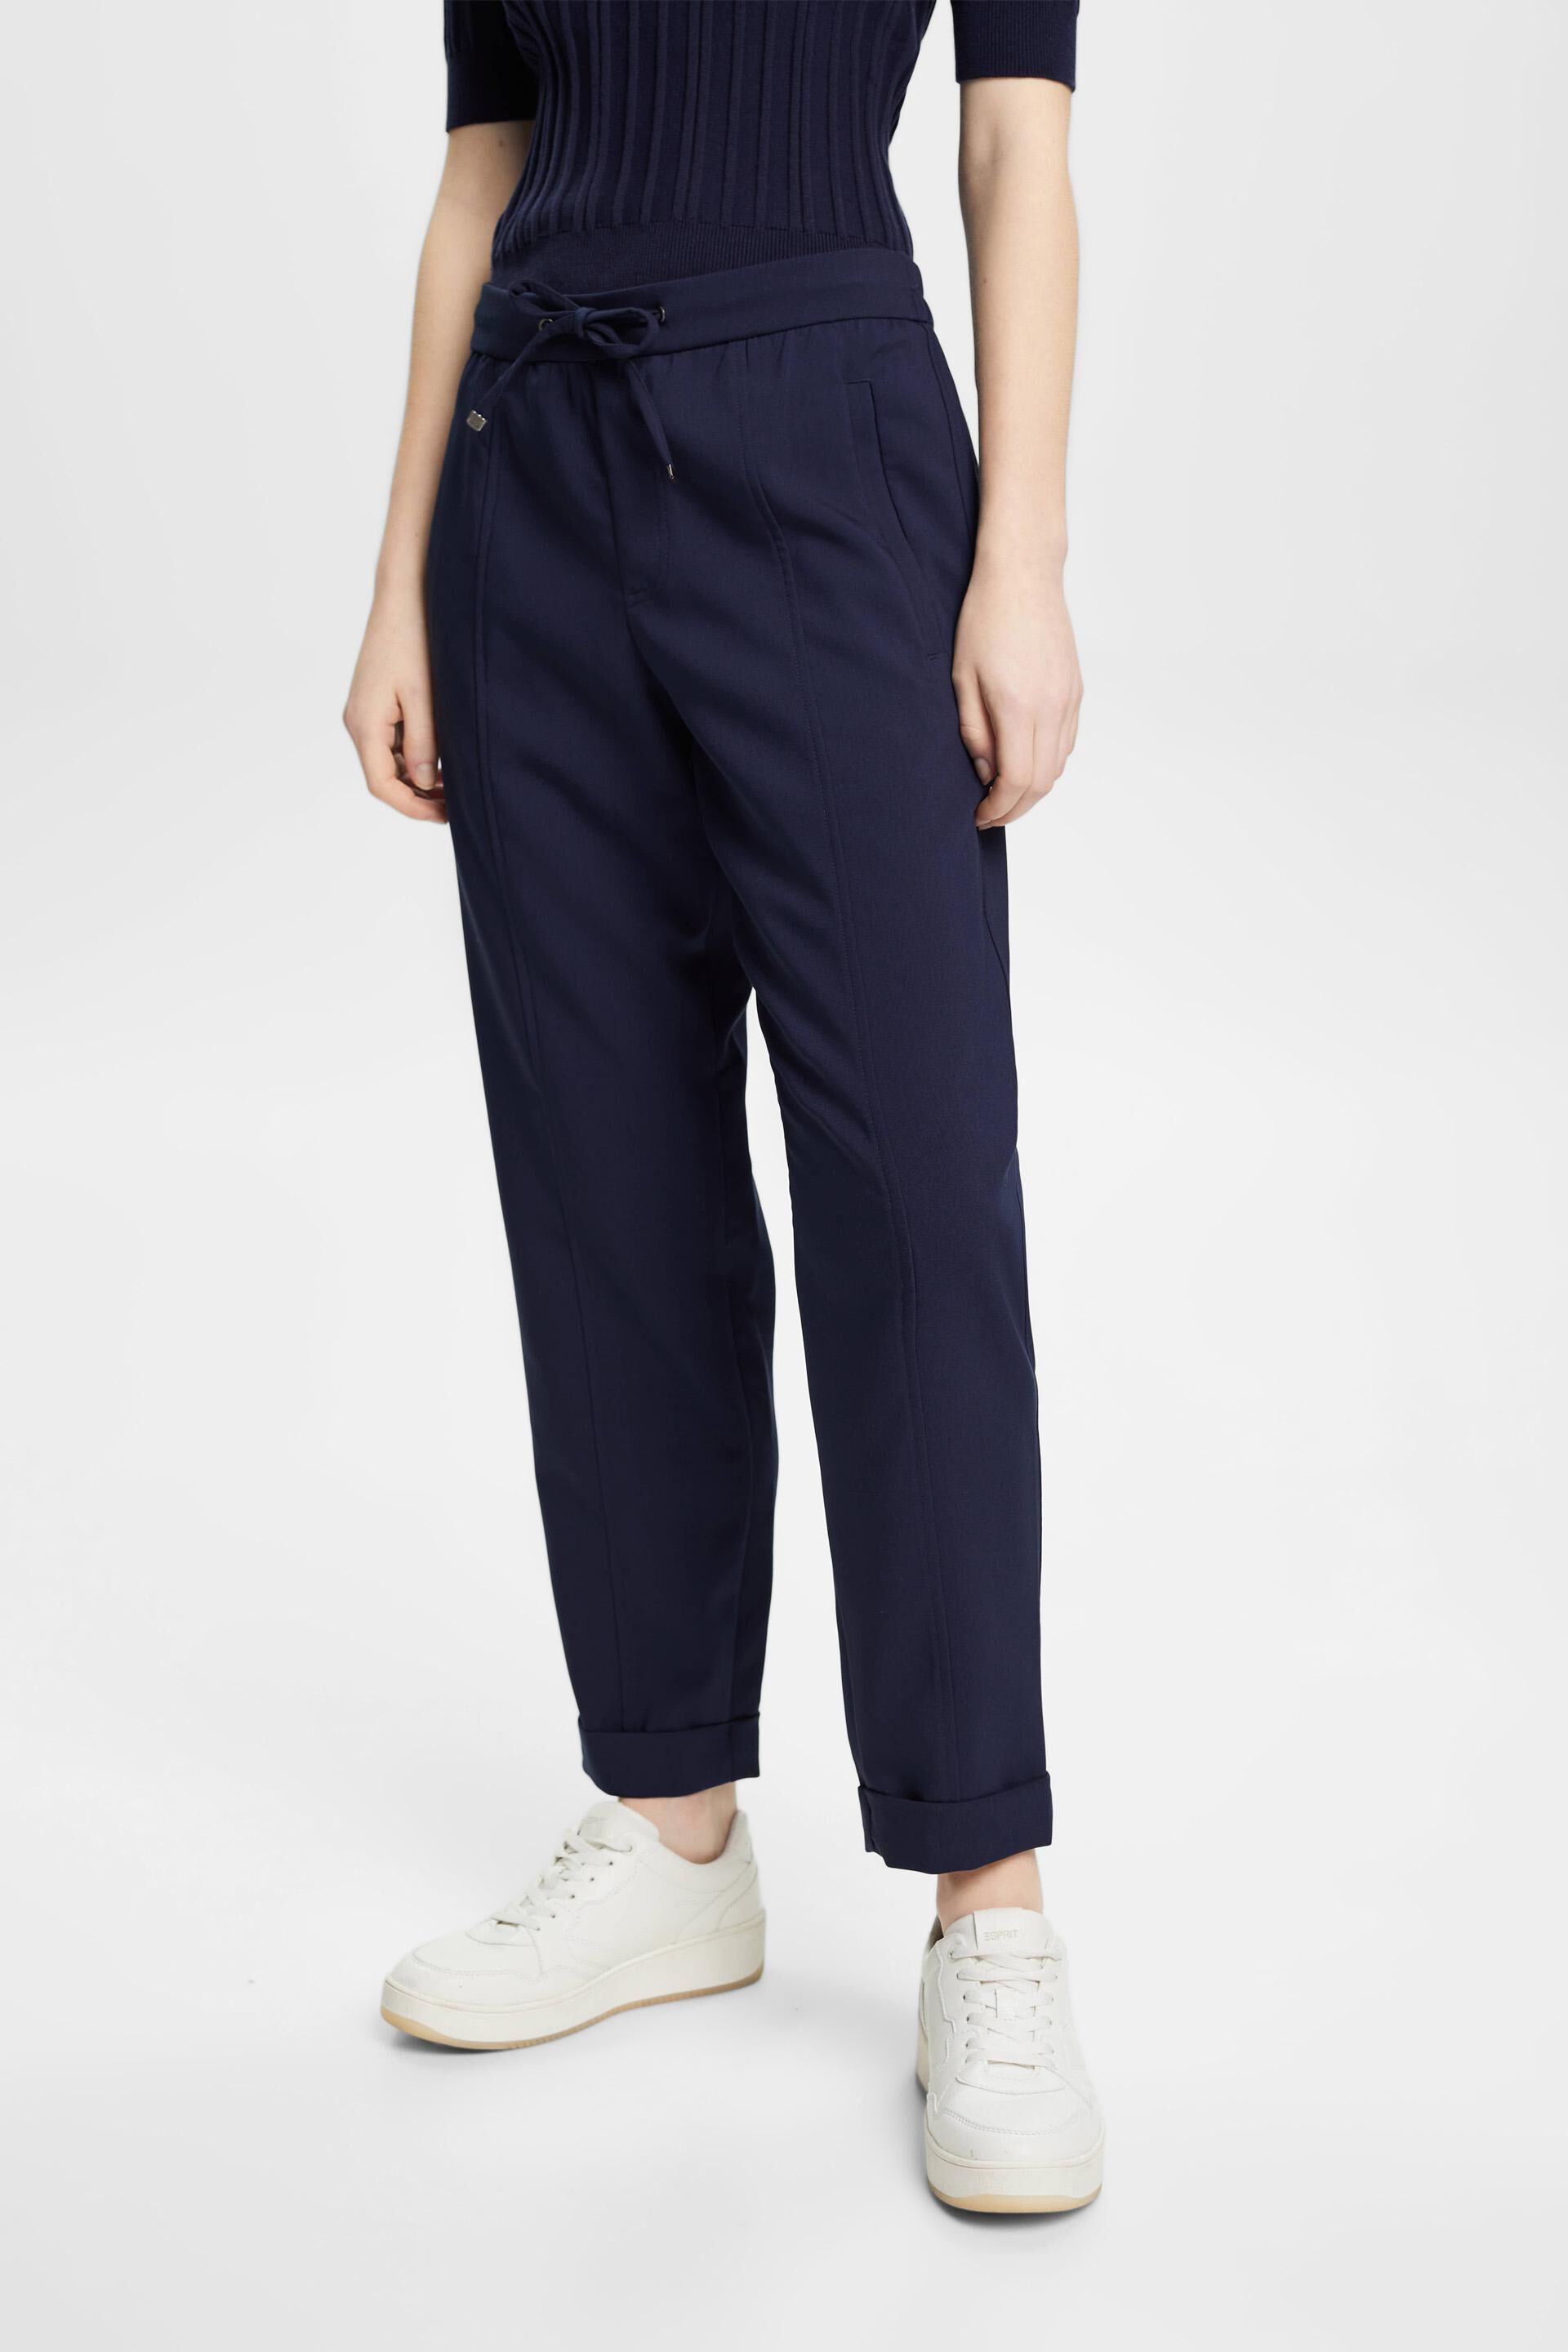 Esprit Jogger style trousers